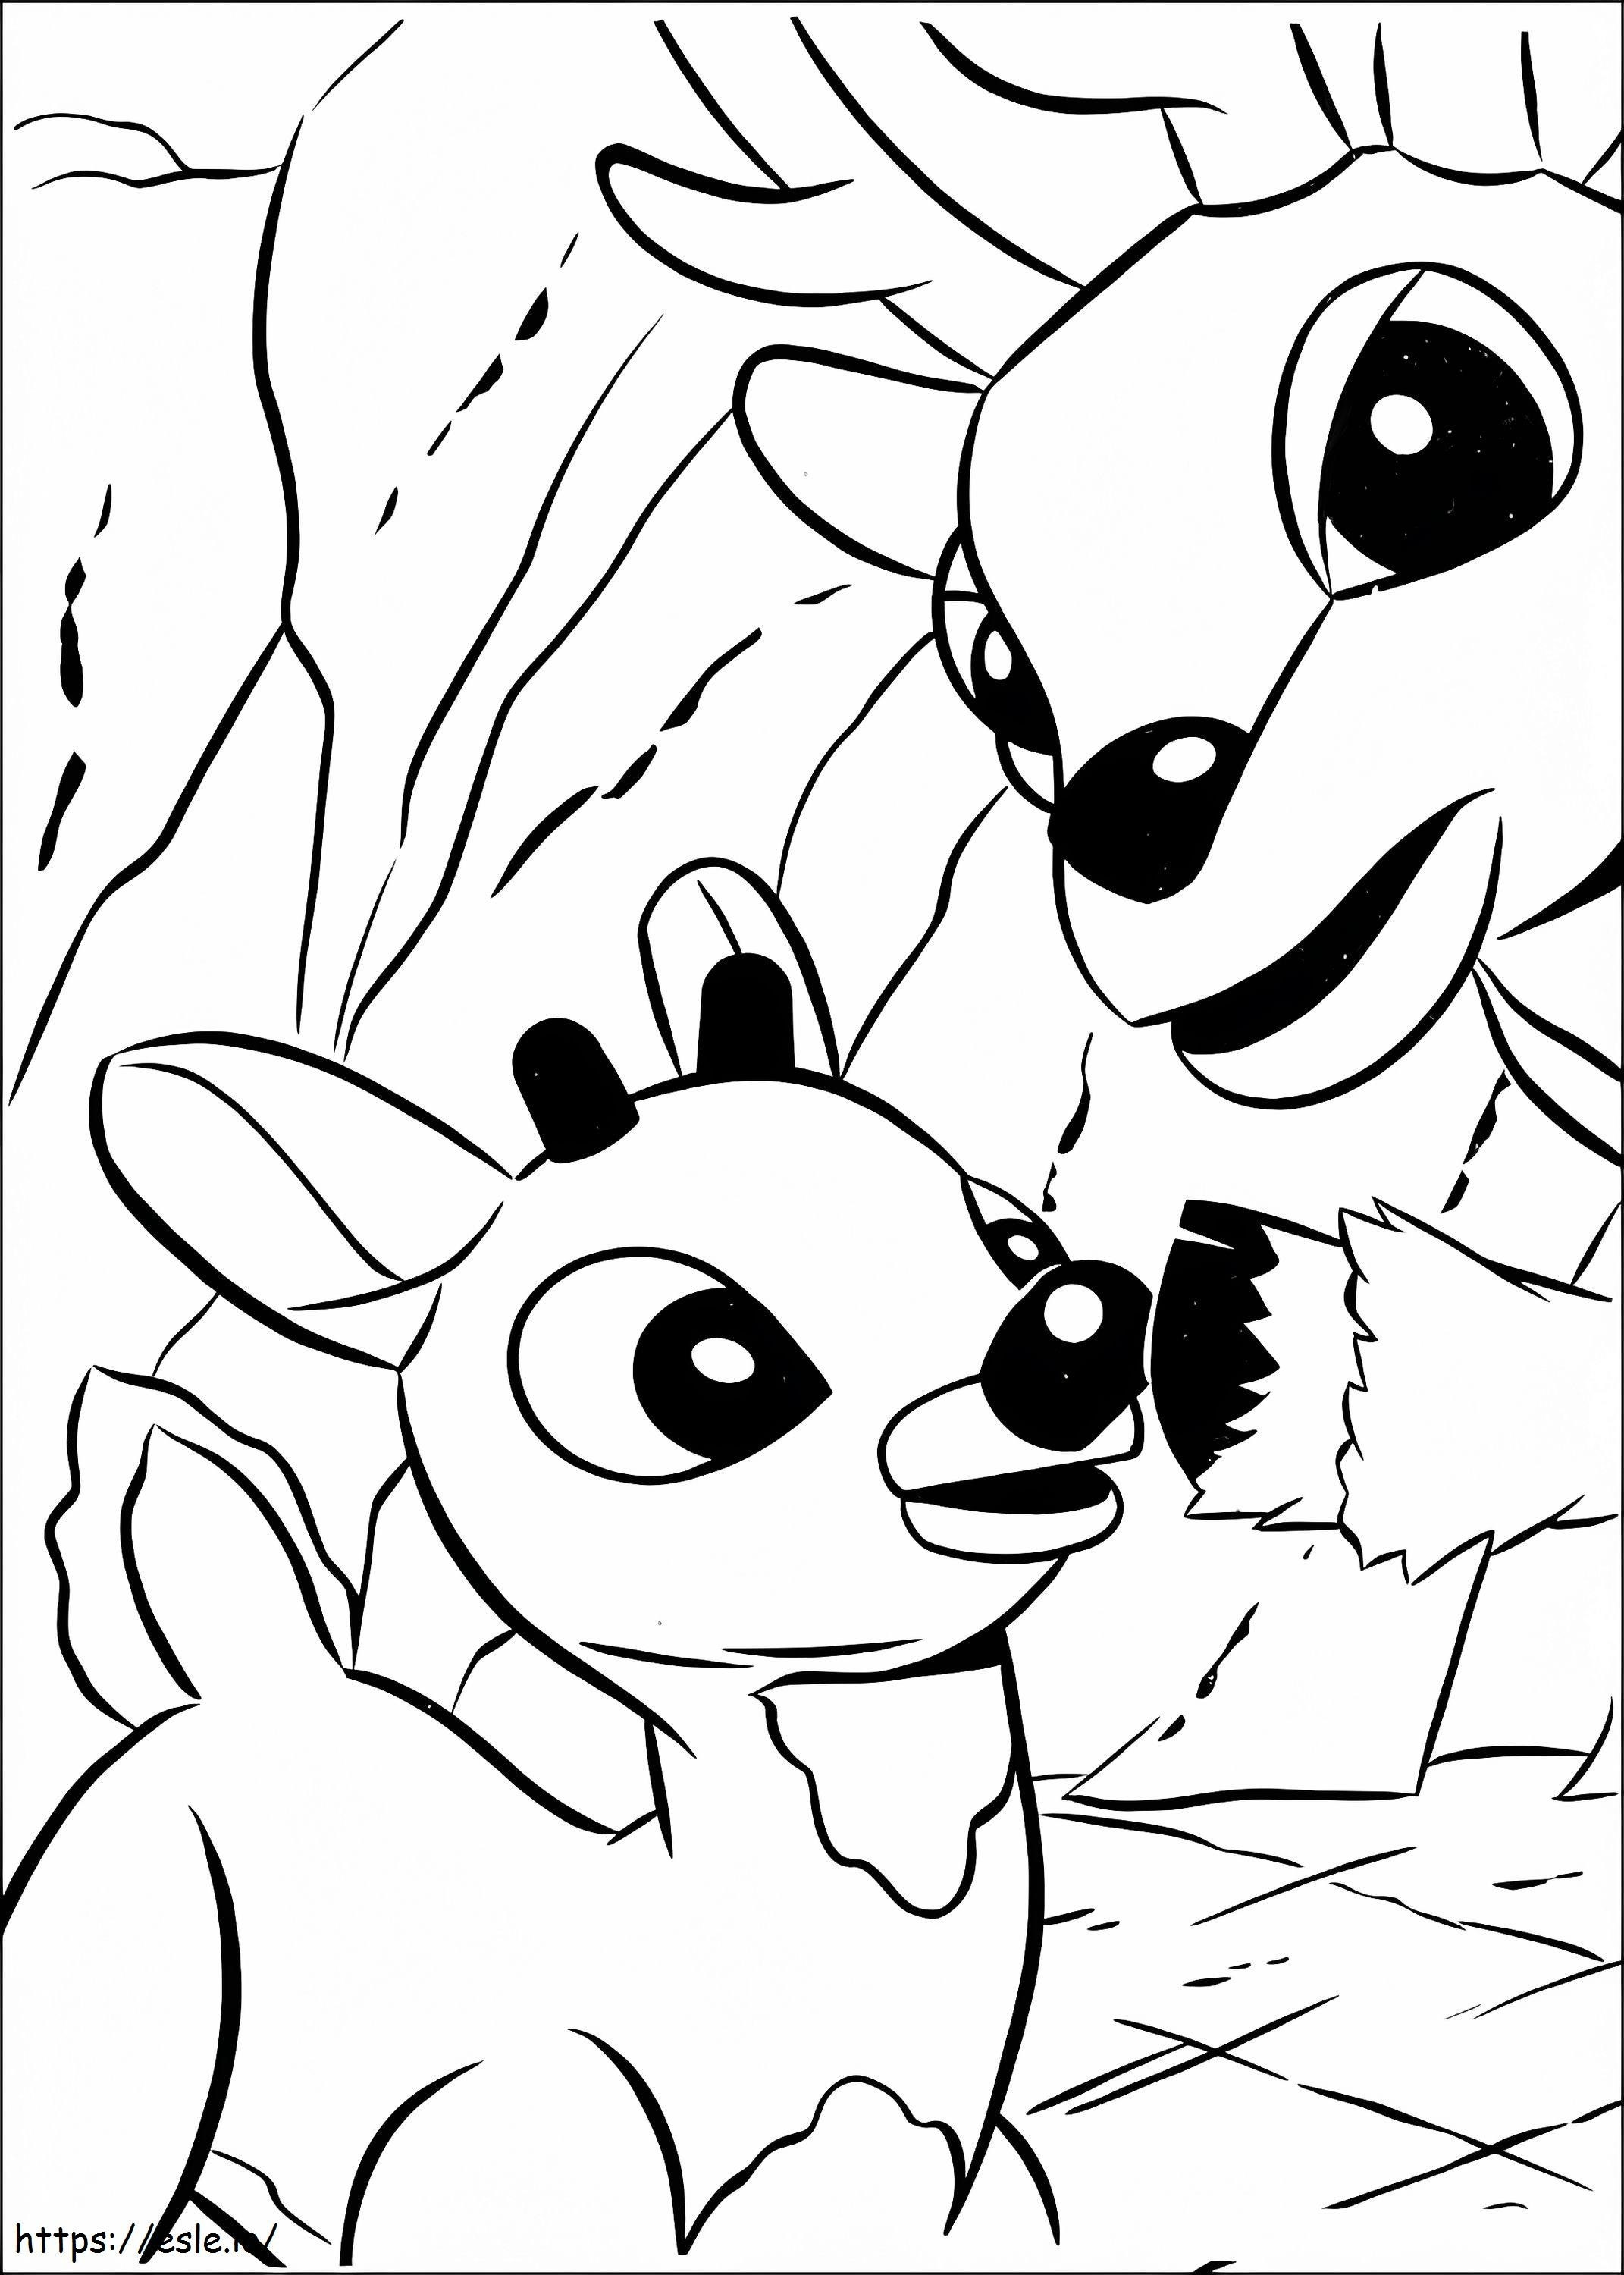 Rudolph 4 coloring page